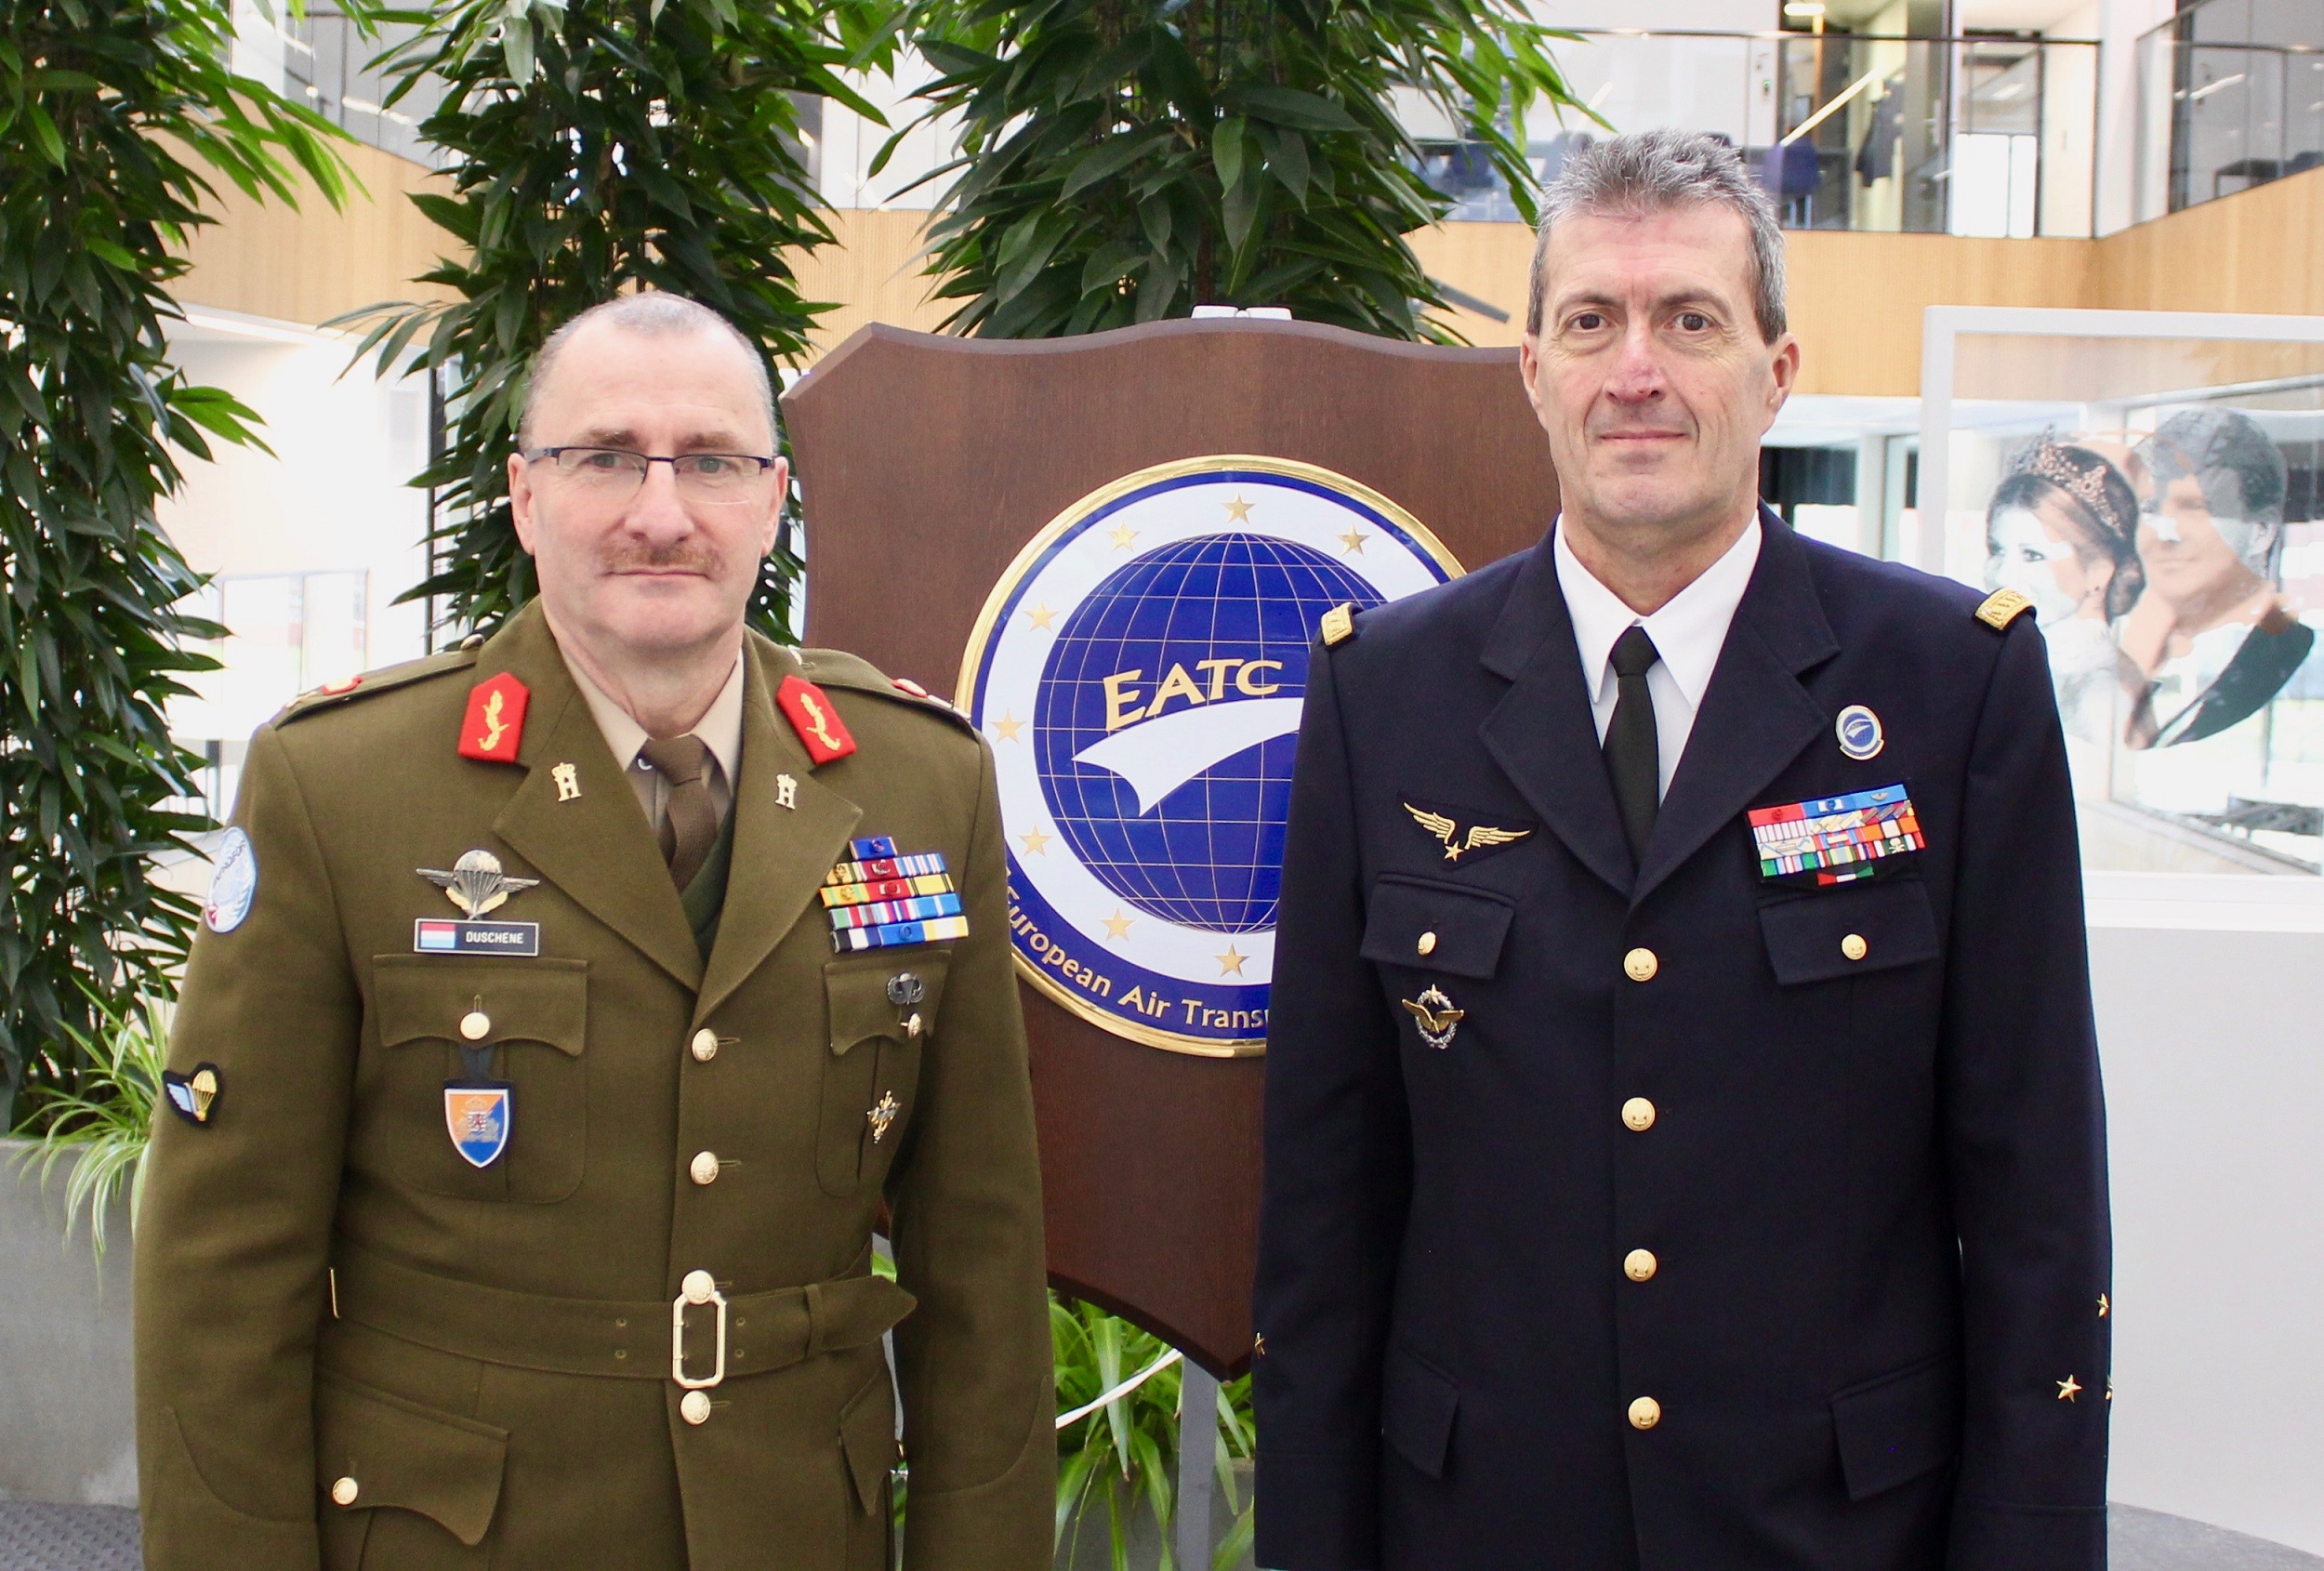 The Luxembourg Chief of Defence visits EATC